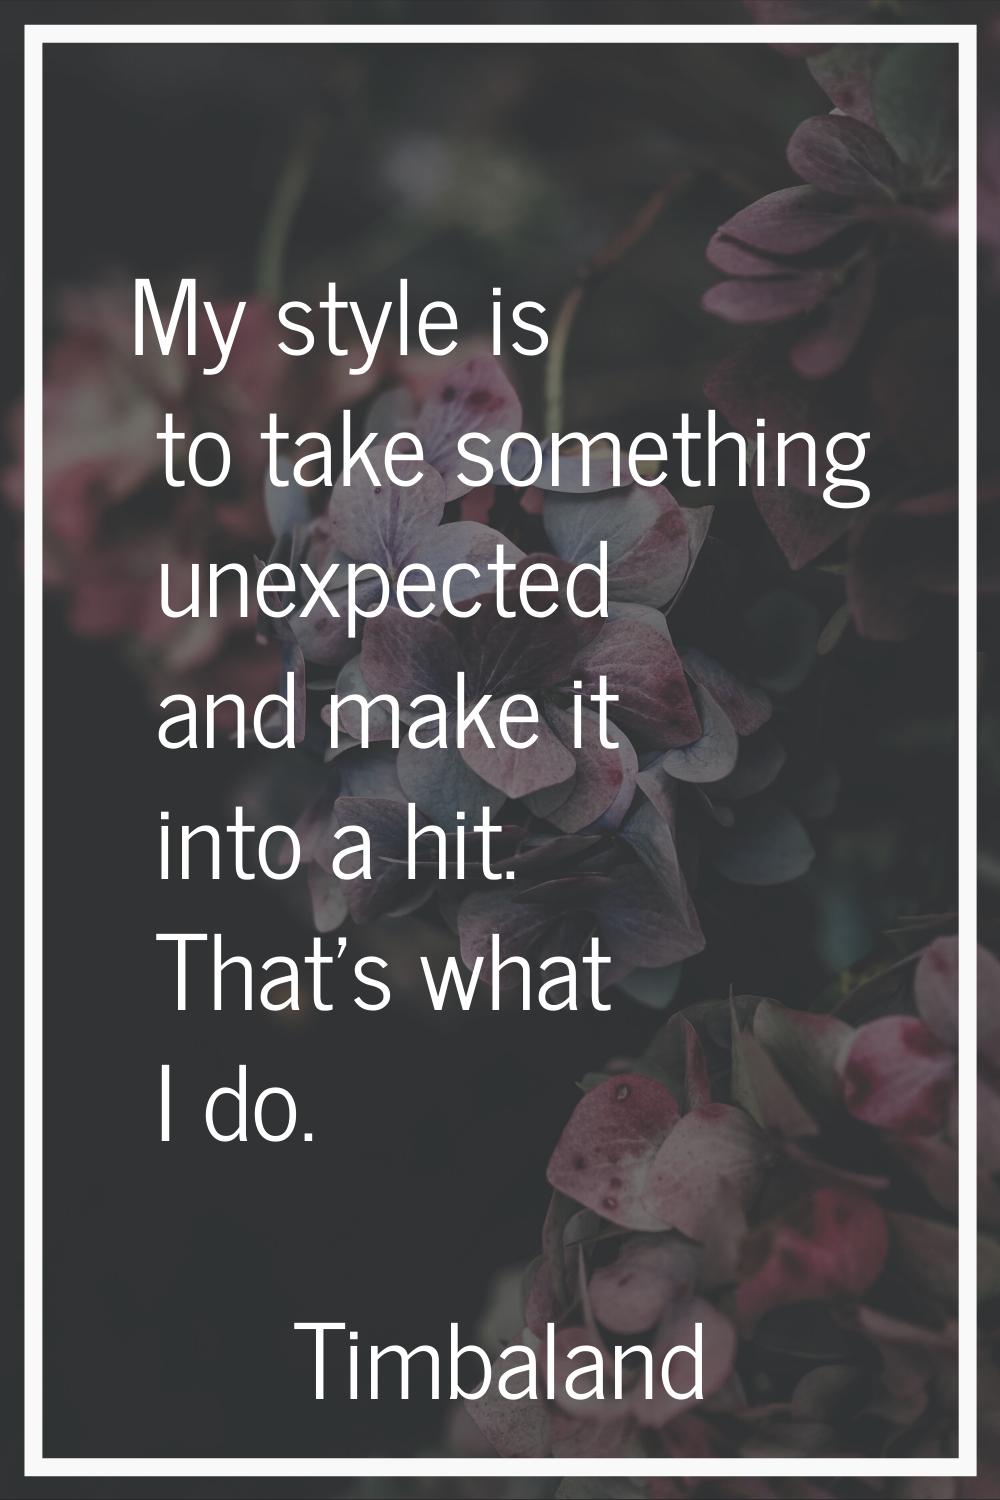 My style is to take something unexpected and make it into a hit. That's what I do.